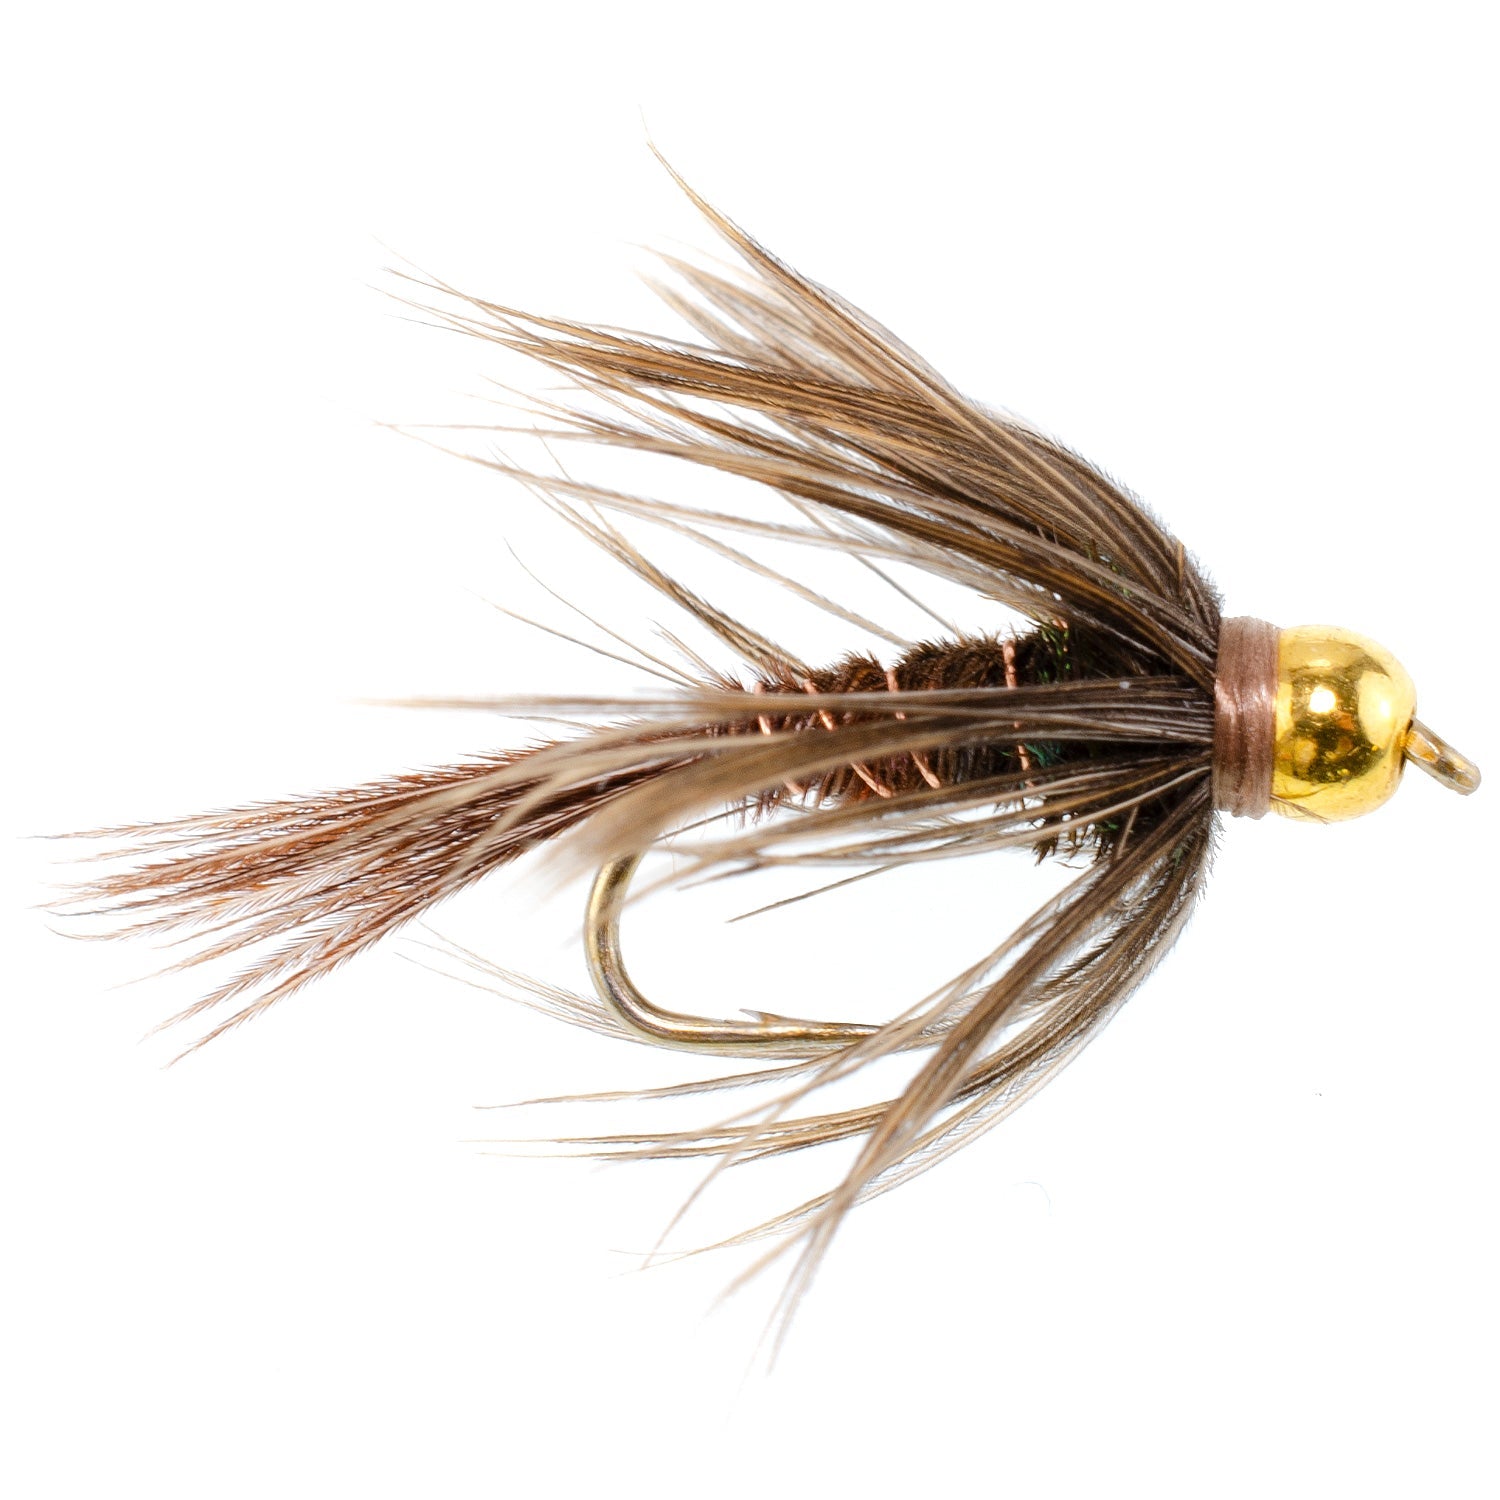 Soft Hackle Bead Head Pheasant Tail Nymph Fly Fishing Flies - 6 Flies Hook Size 16